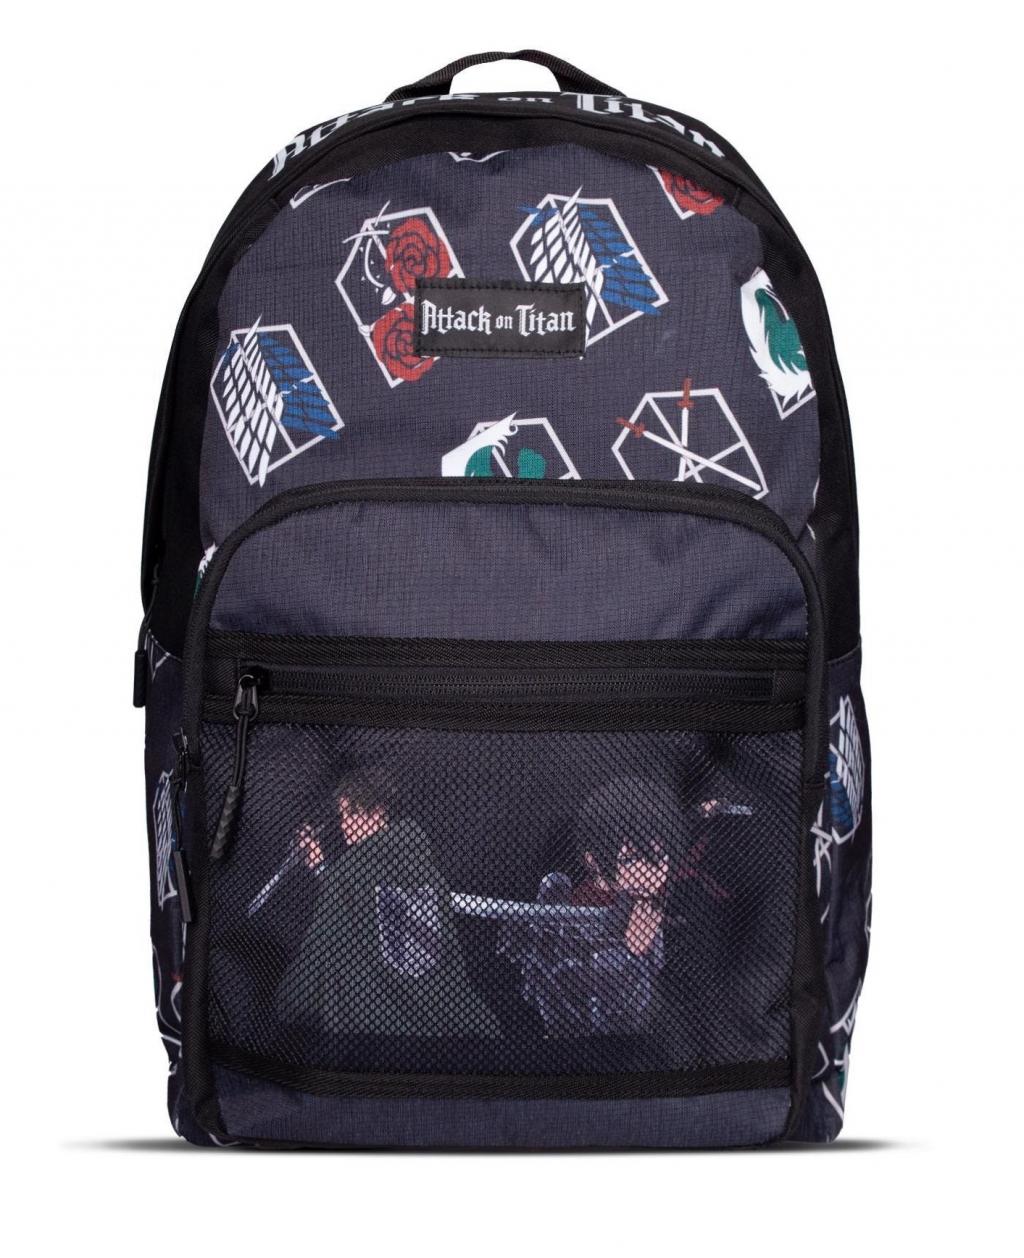 ATTACK ON TITAN - Backpack